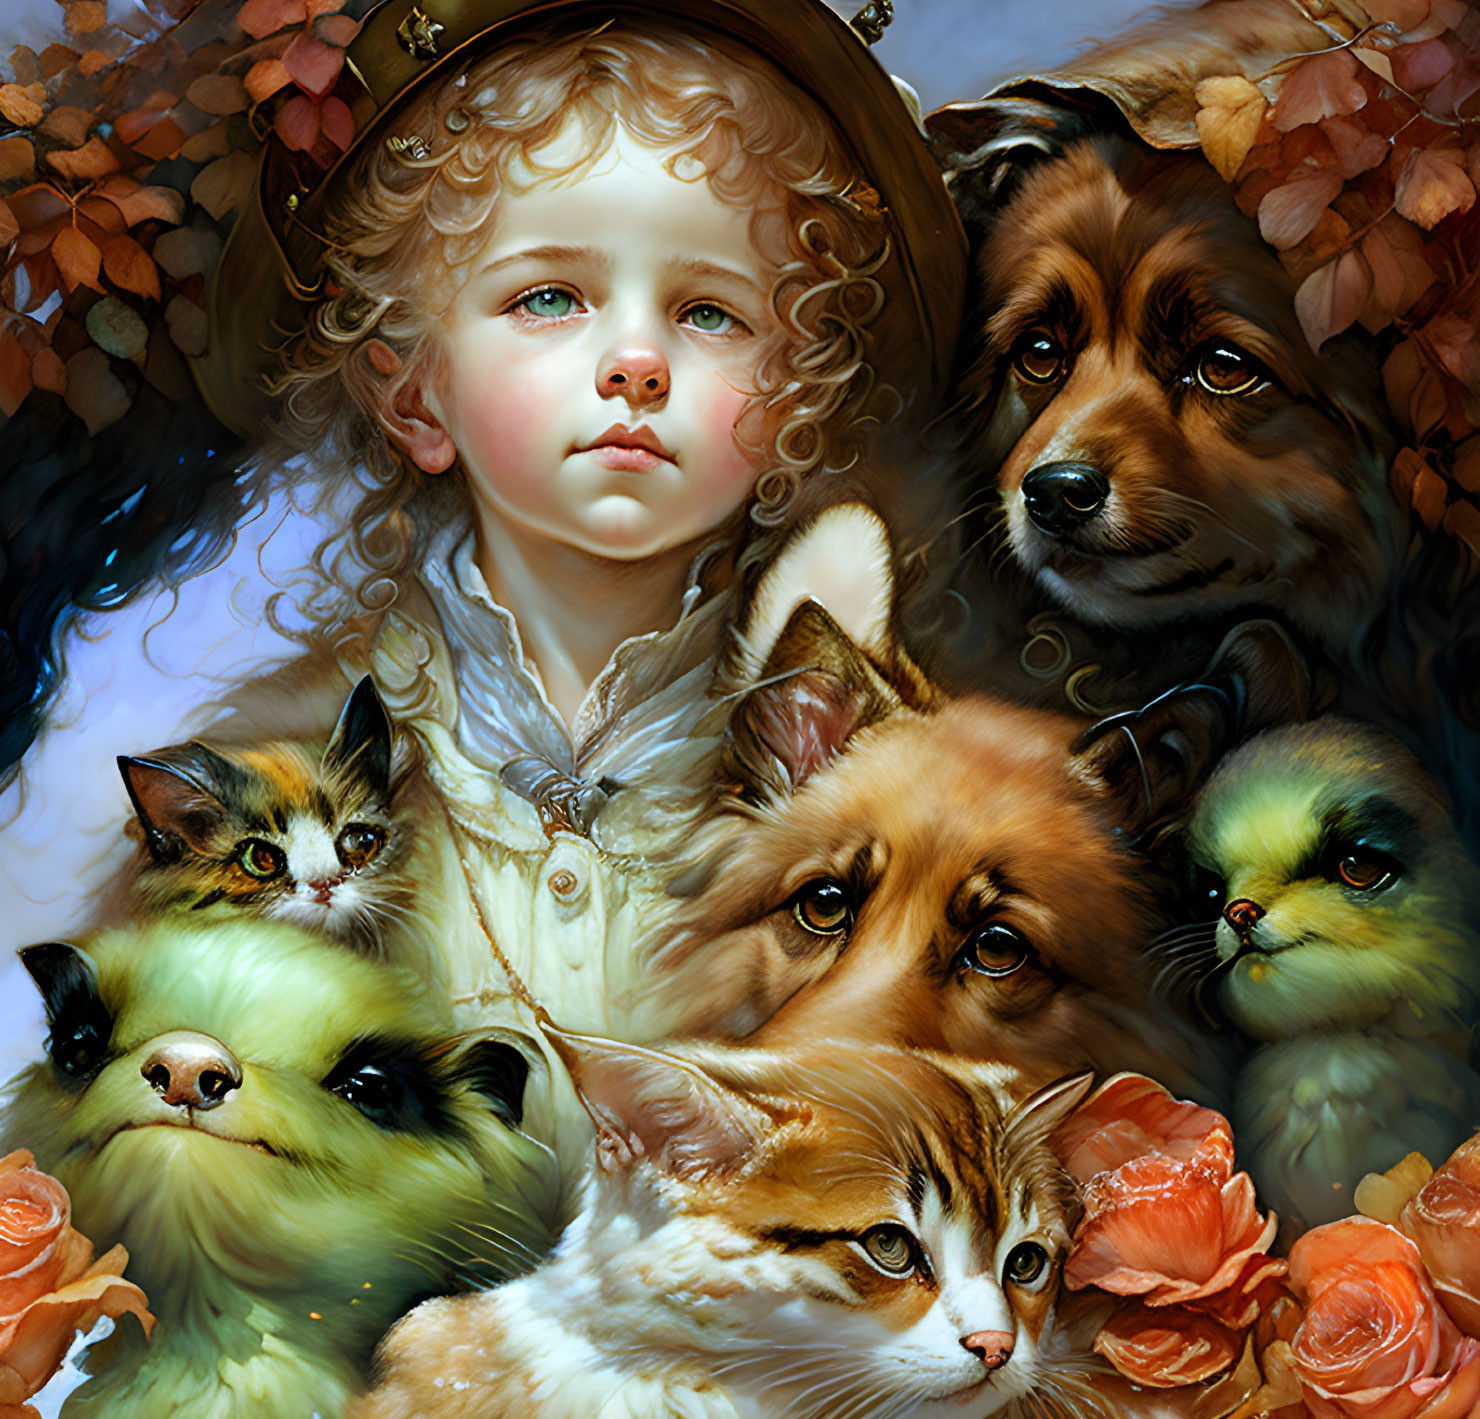 Child with angelic features surrounded by affectionate animals and flowers